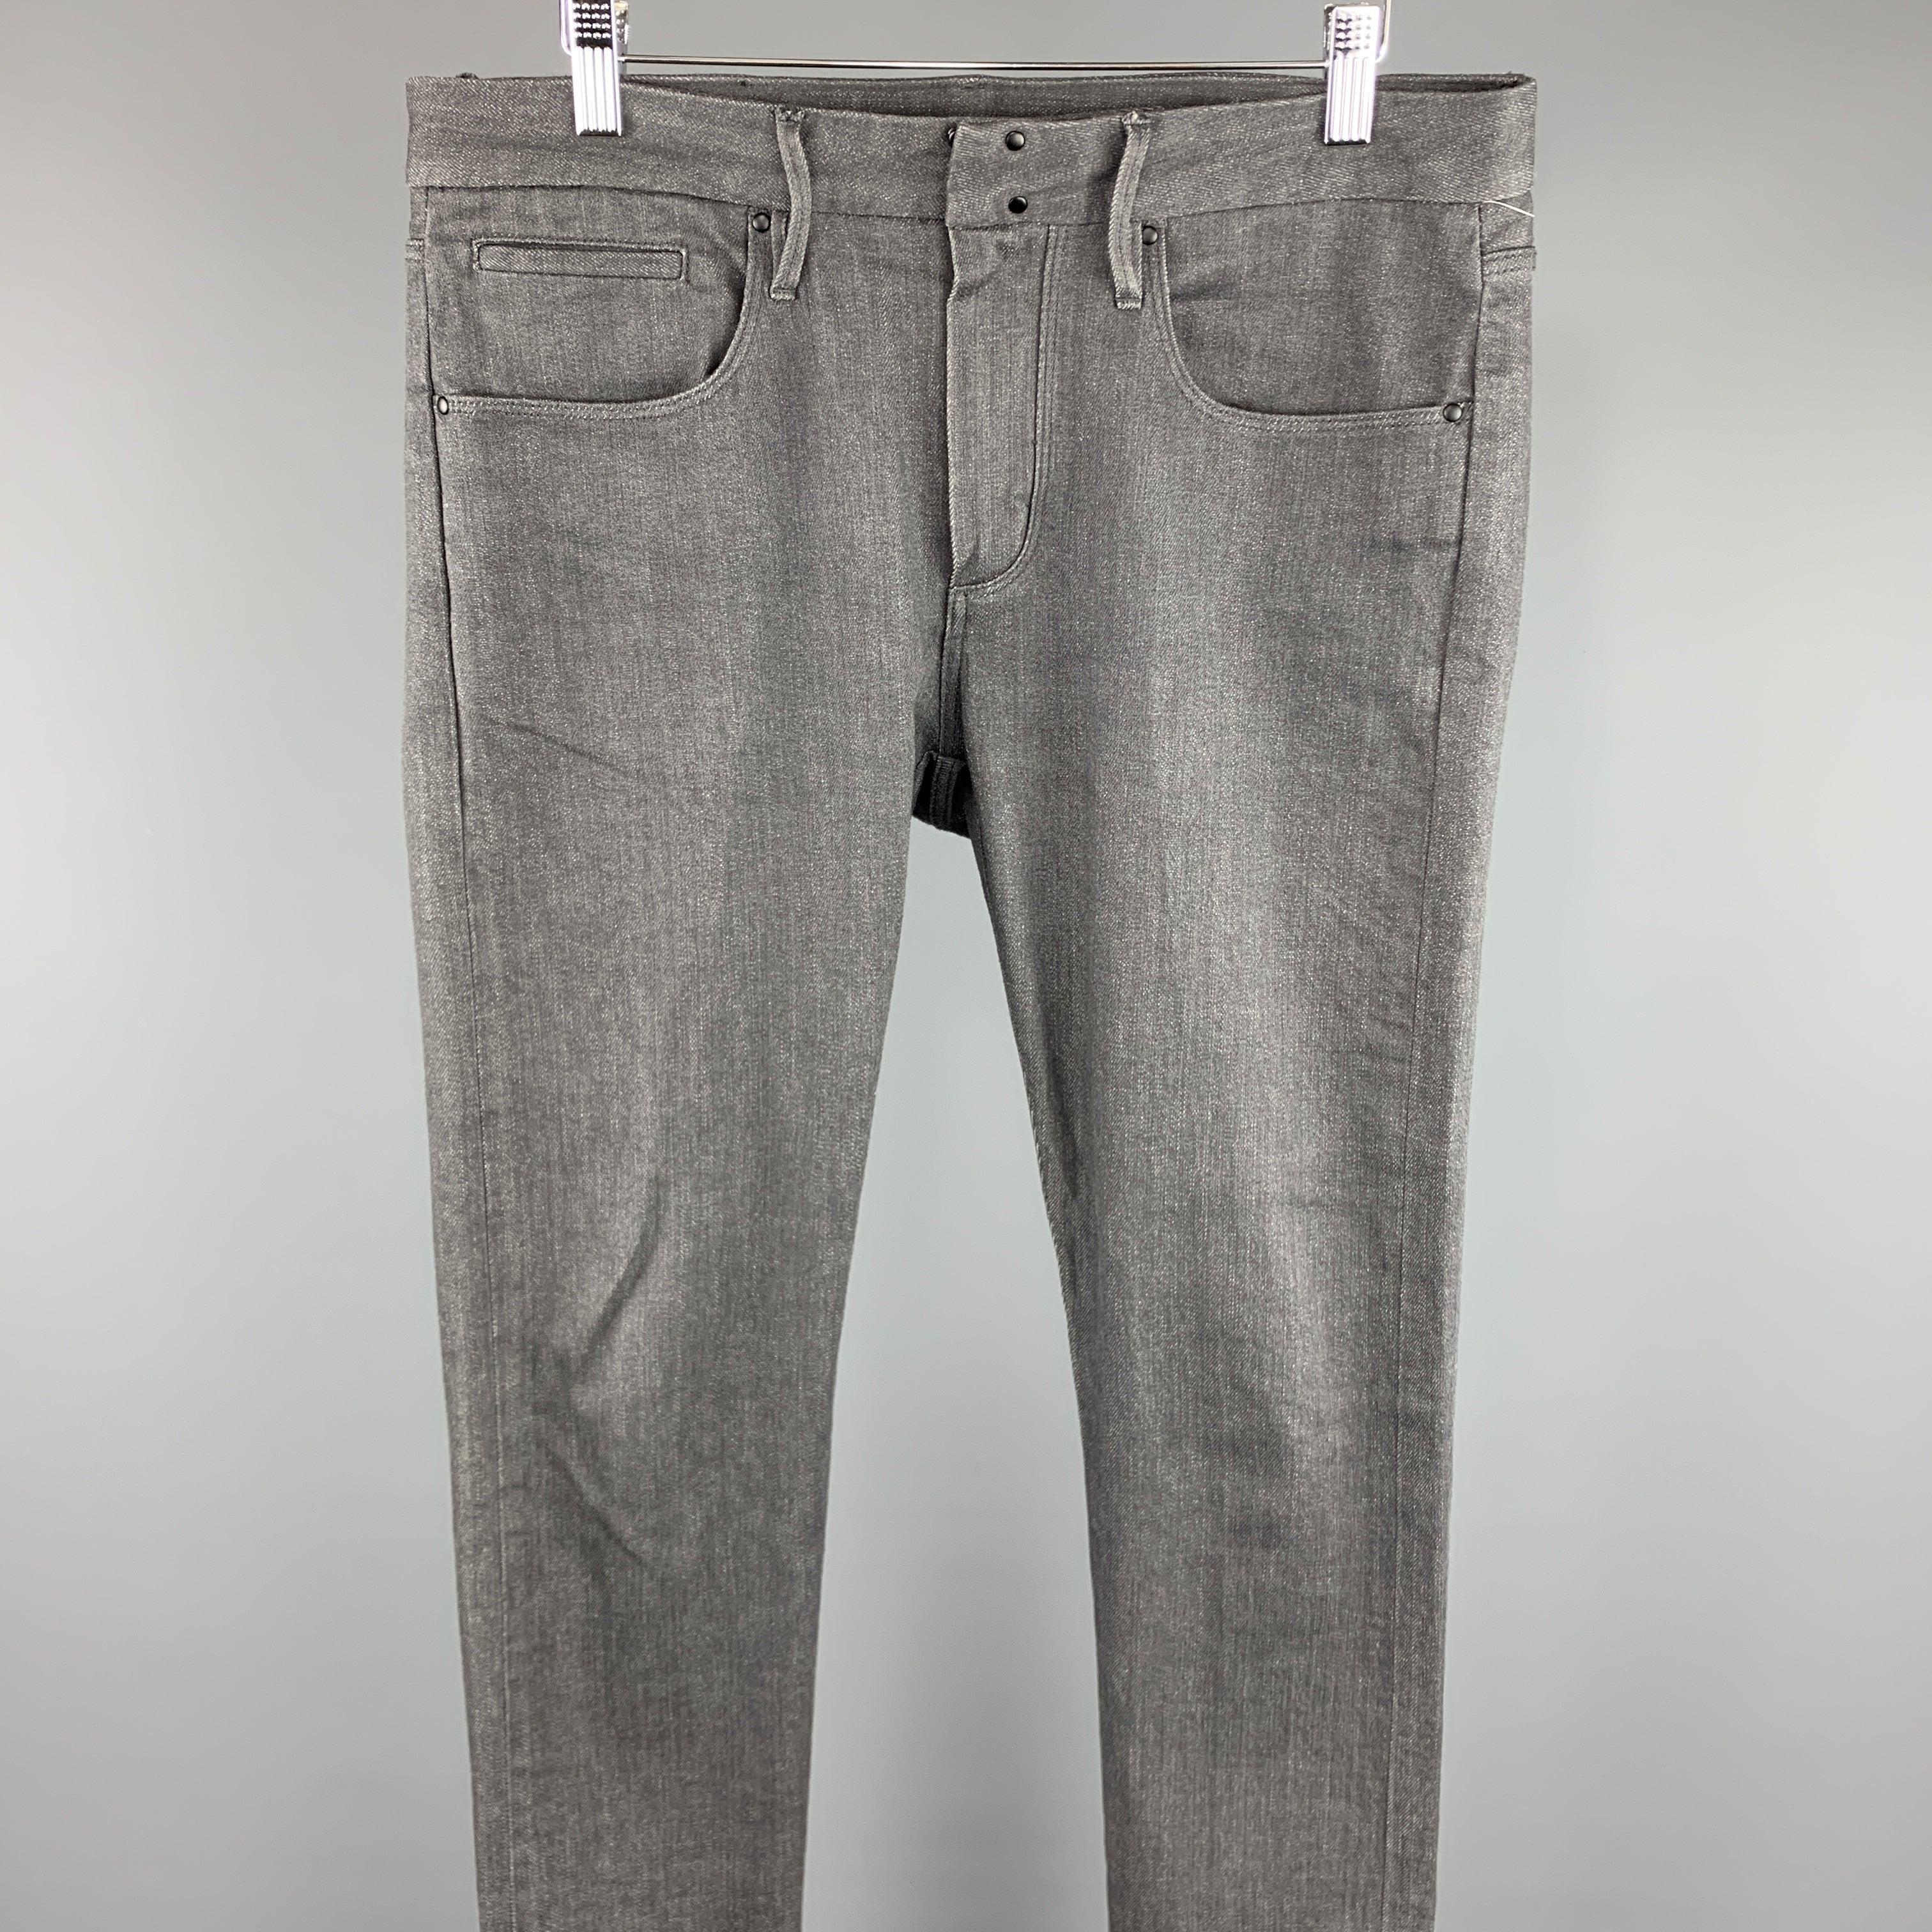 EMPORIO ARMANI Size 32 x 32 Charcoal Cotton Zip Fly Jeans In Good Condition For Sale In San Francisco, CA